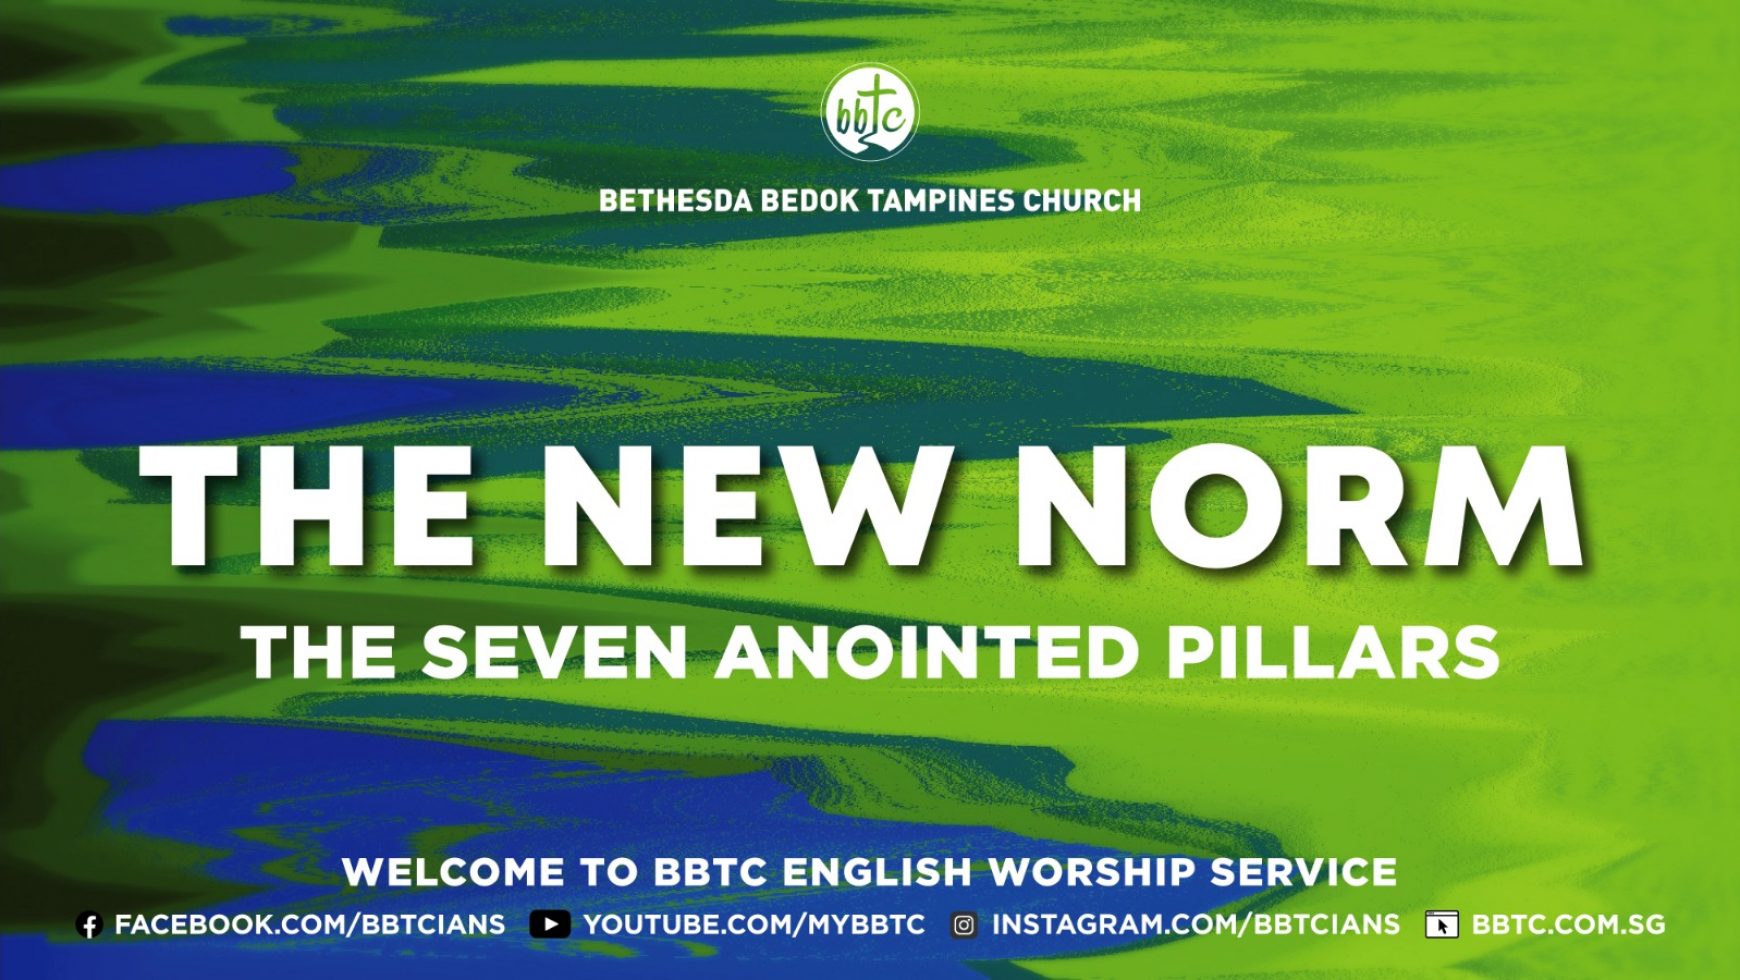 The New Norm: The Seven Anointed Pillars